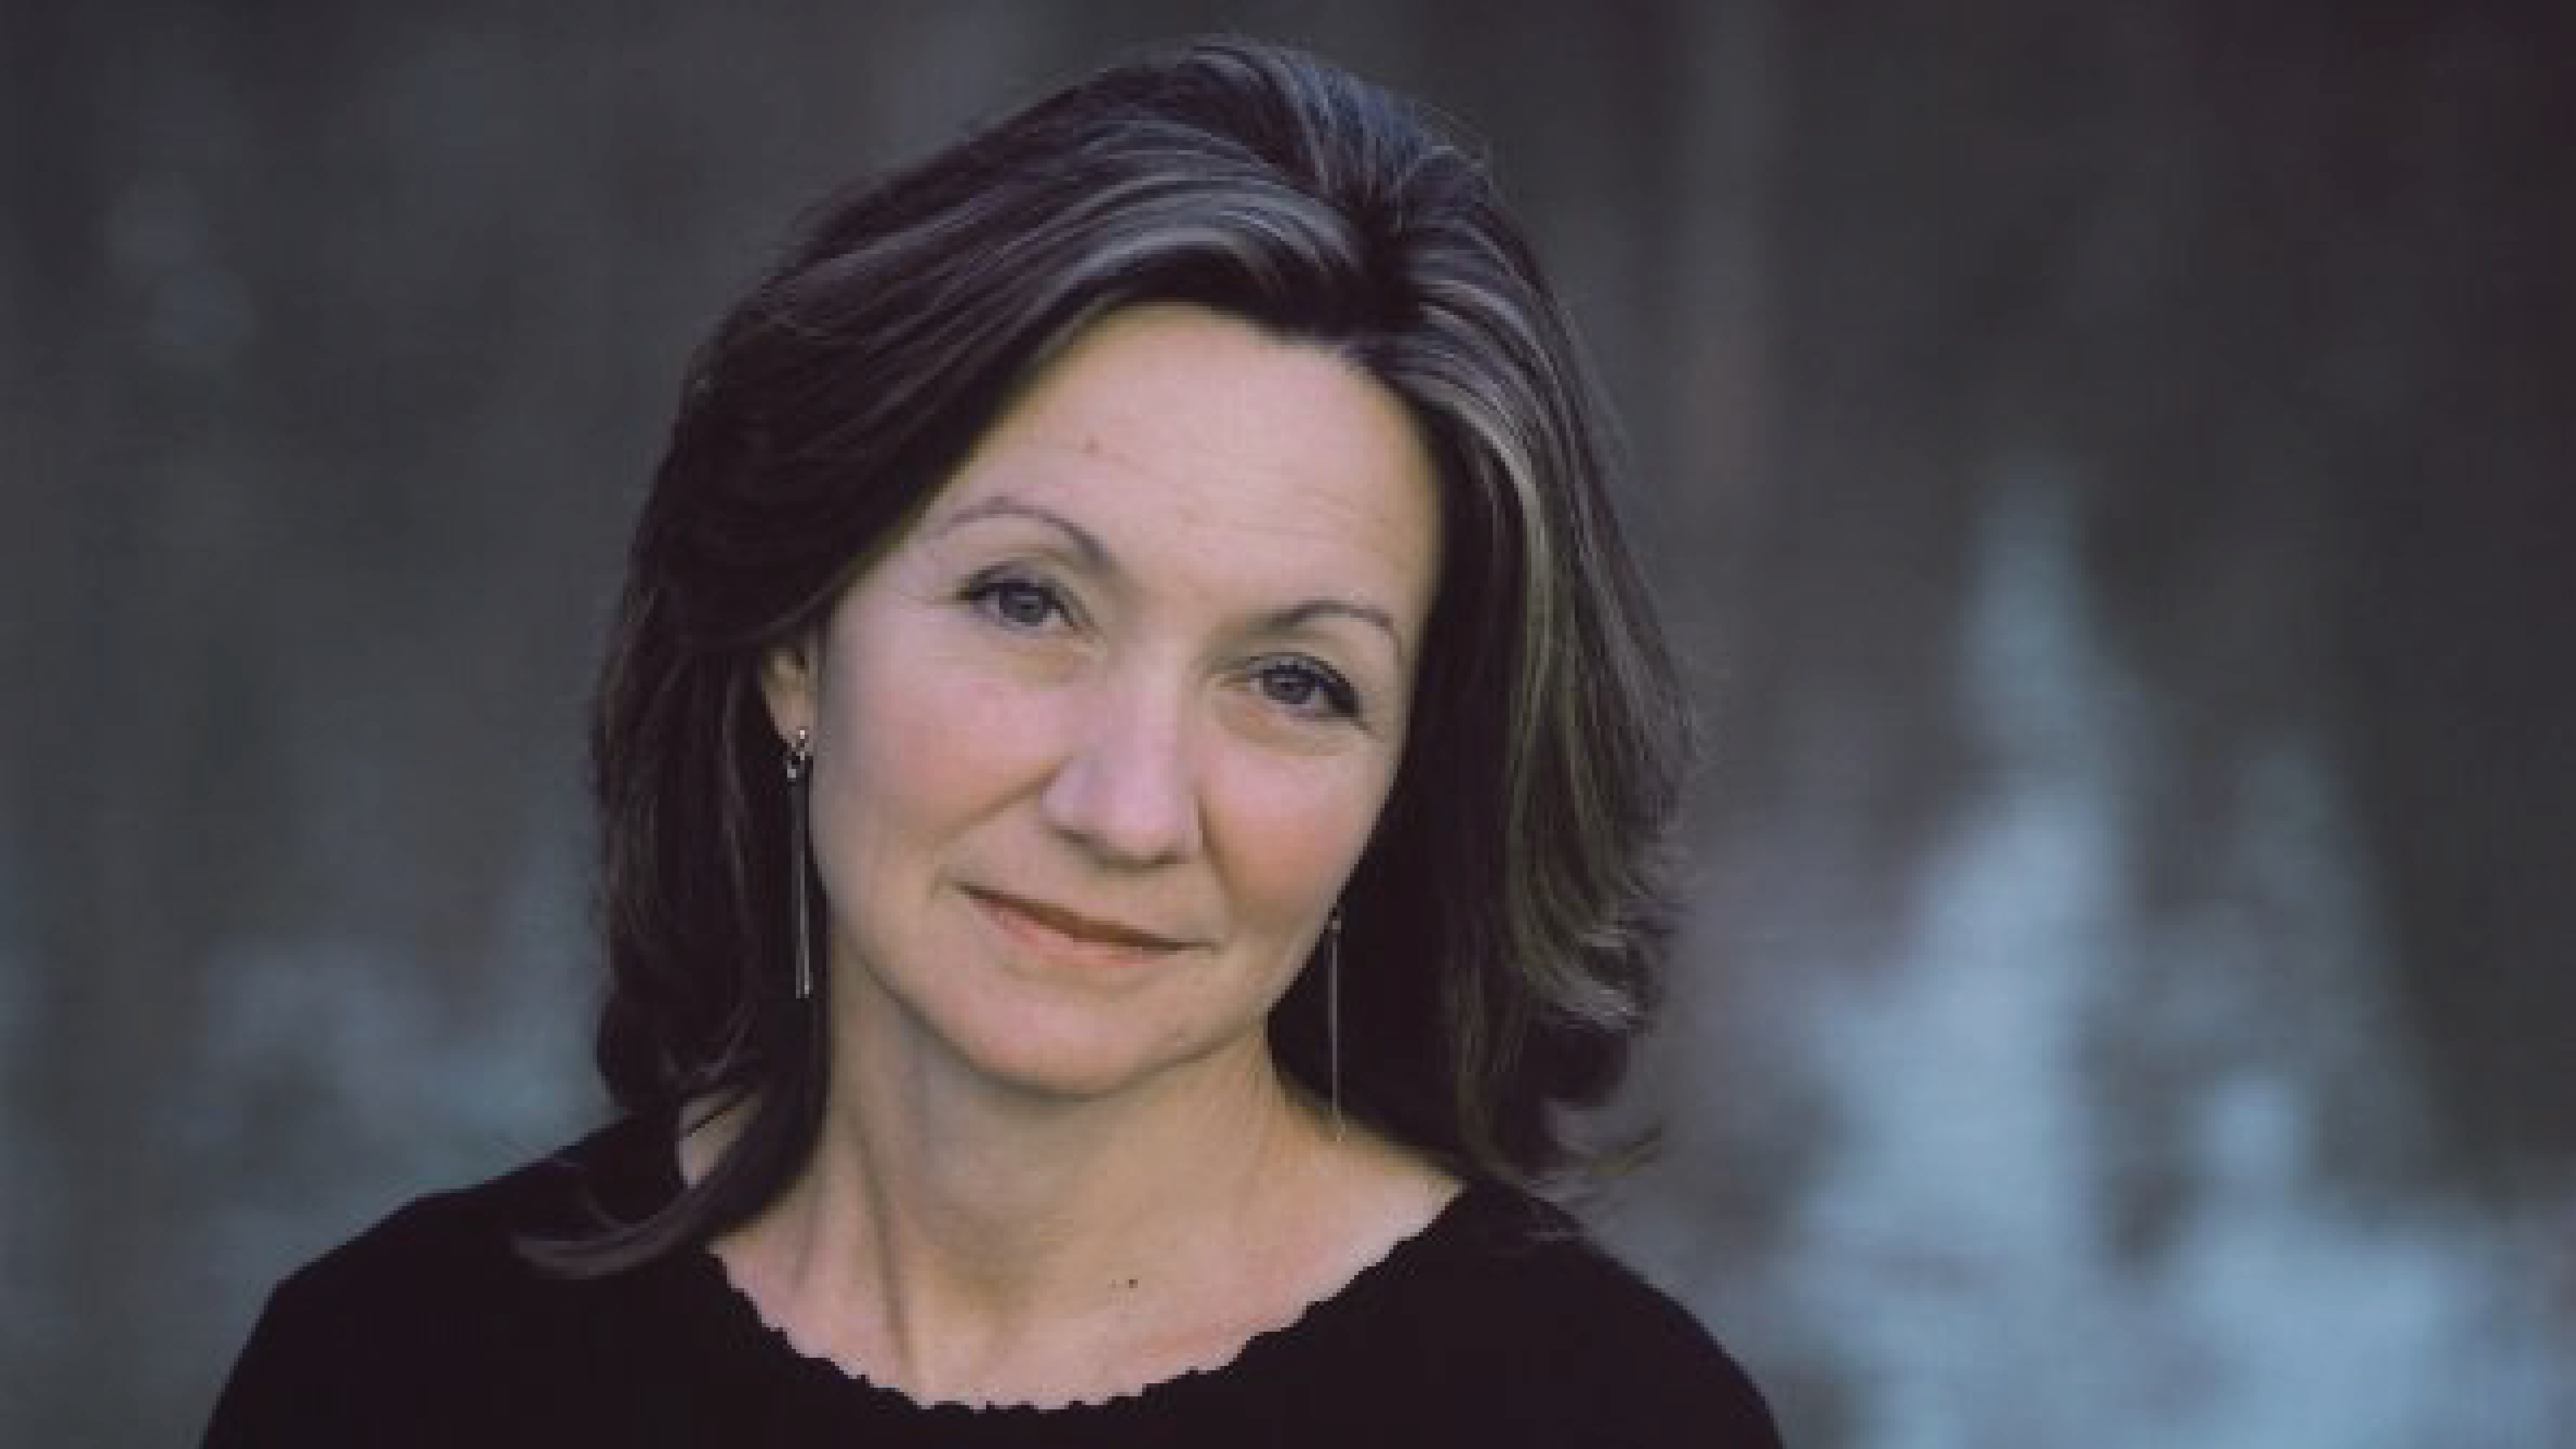 Register for Well Read with Jill McCorkle